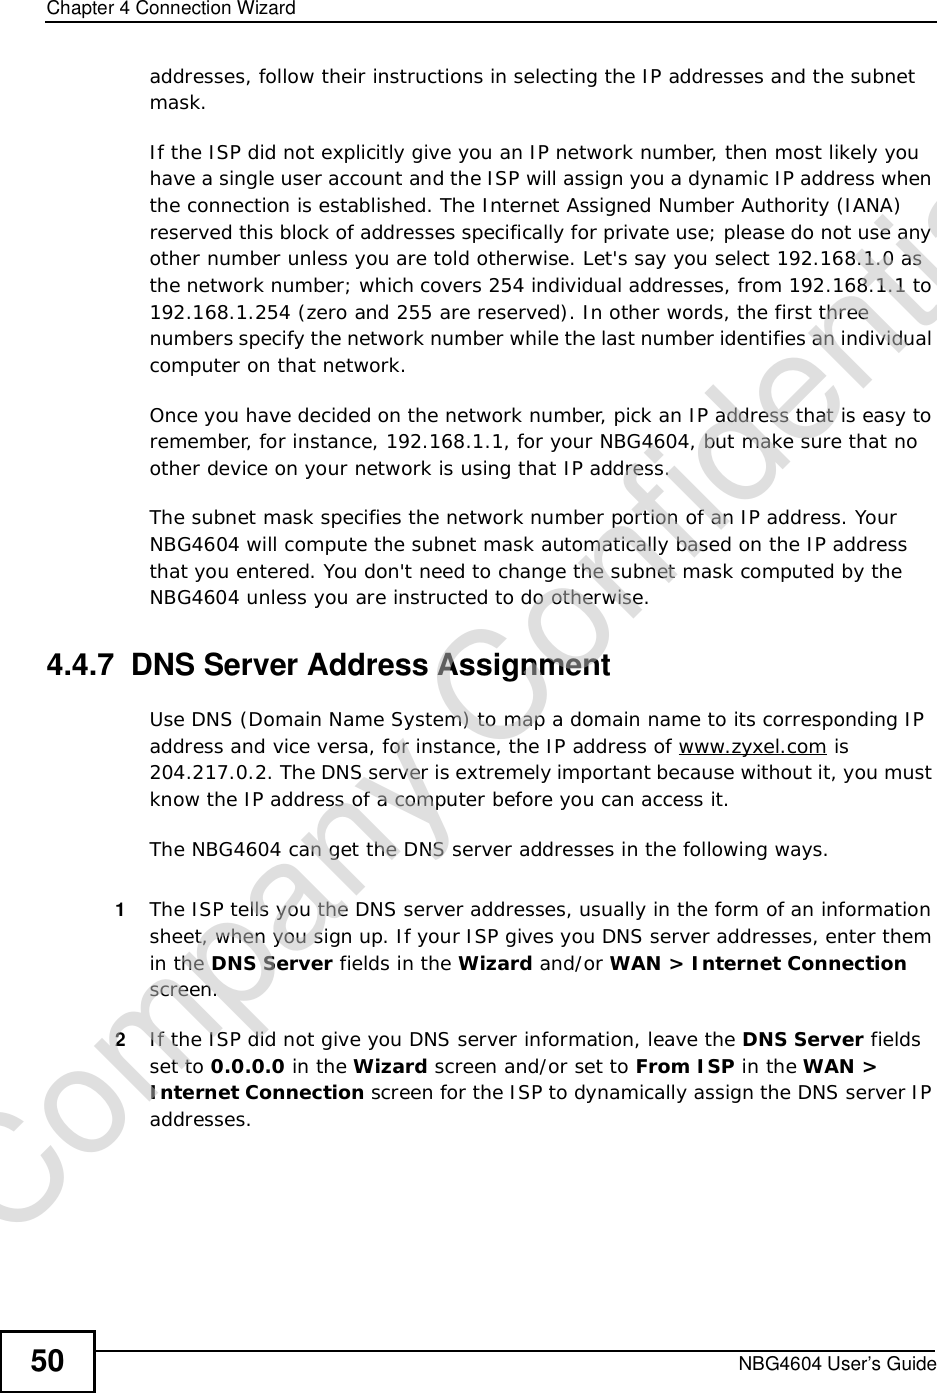 Chapter 4Connection WizardNBG4604 User’s Guide50addresses, follow their instructions in selecting the IP addresses and the subnet mask.If the ISP did not explicitly give you an IP network number, then most likely you have a single user account and the ISP will assign you a dynamic IP address when the connection is established. The Internet Assigned Number Authority (IANA) reserved this block of addresses specifically for private use; please do not use any other number unless you are told otherwise. Let&apos;s say you select 192.168.1.0 as the network number; which covers 254 individual addresses, from 192.168.1.1 to 192.168.1.254 (zero and 255 are reserved). In other words, the first three numbers specify the network number while the last number identifies an individual computer on that network.Once you have decided on the network number, pick an IP address that is easy to remember, for instance, 192.168.1.1, for your NBG4604, but make sure that no other device on your network is using that IP address.The subnet mask specifies the network number portion of an IP address. Your NBG4604 will compute the subnet mask automatically based on the IP address that you entered. You don&apos;t need to change the subnet mask computed by the NBG4604 unless you are instructed to do otherwise.4.4.7  DNS Server Address AssignmentUse DNS (Domain Name System) to map a domain name to its corresponding IP address and vice versa, for instance, the IP address of www.zyxel.com is 204.217.0.2. The DNS server is extremely important because without it, you must know the IP address of a computer before you can access it. The NBG4604 can get the DNS server addresses in the following ways.1The ISP tells you the DNS server addresses, usually in the form of an information sheet, when you sign up. If your ISP gives you DNS server addresses, enter them in the DNS Server fields in the Wizard and/or WAN&gt; Internet Connectionscreen.2If the ISP did not give you DNS server information, leave the DNS Server fields set to 0.0.0.0 in the Wizard screen and/or set to From ISP in the WAN&gt;Internet Connection screen for the ISP to dynamically assign the DNS server IP addresses.Company Confidential